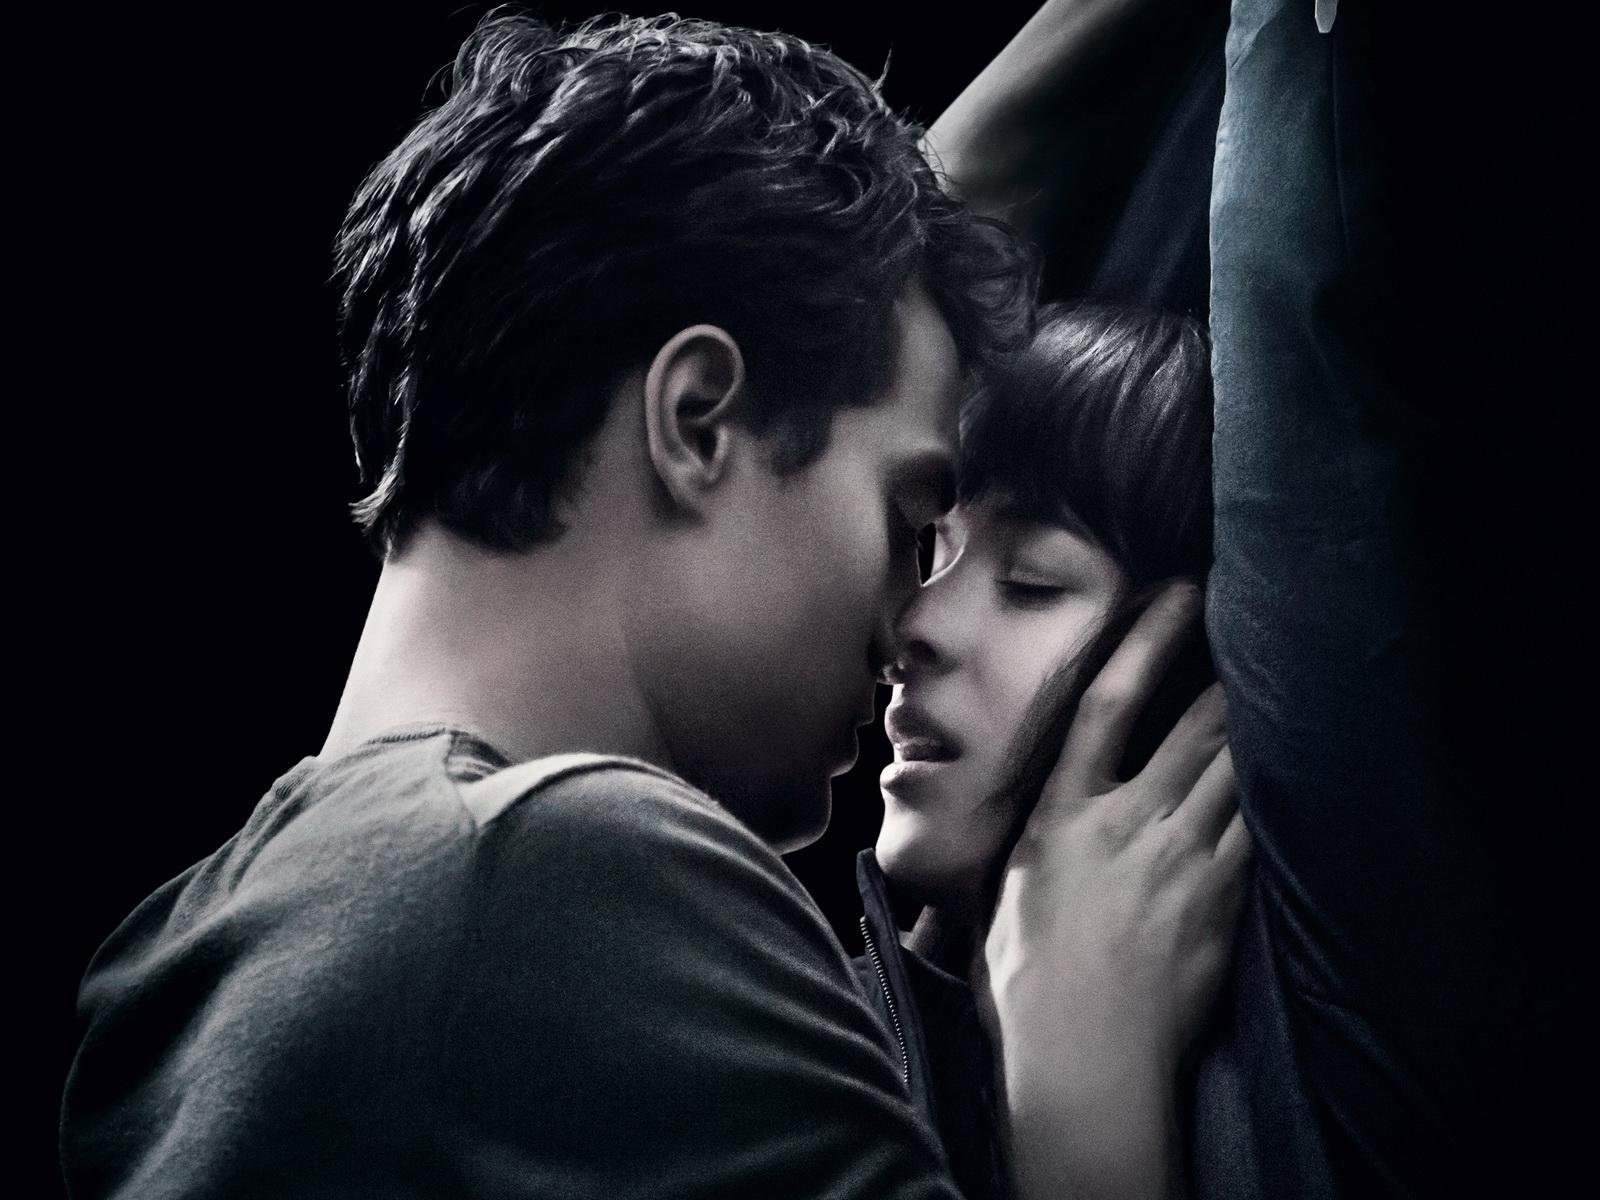 free download fifty shades of grey full movie in mkv